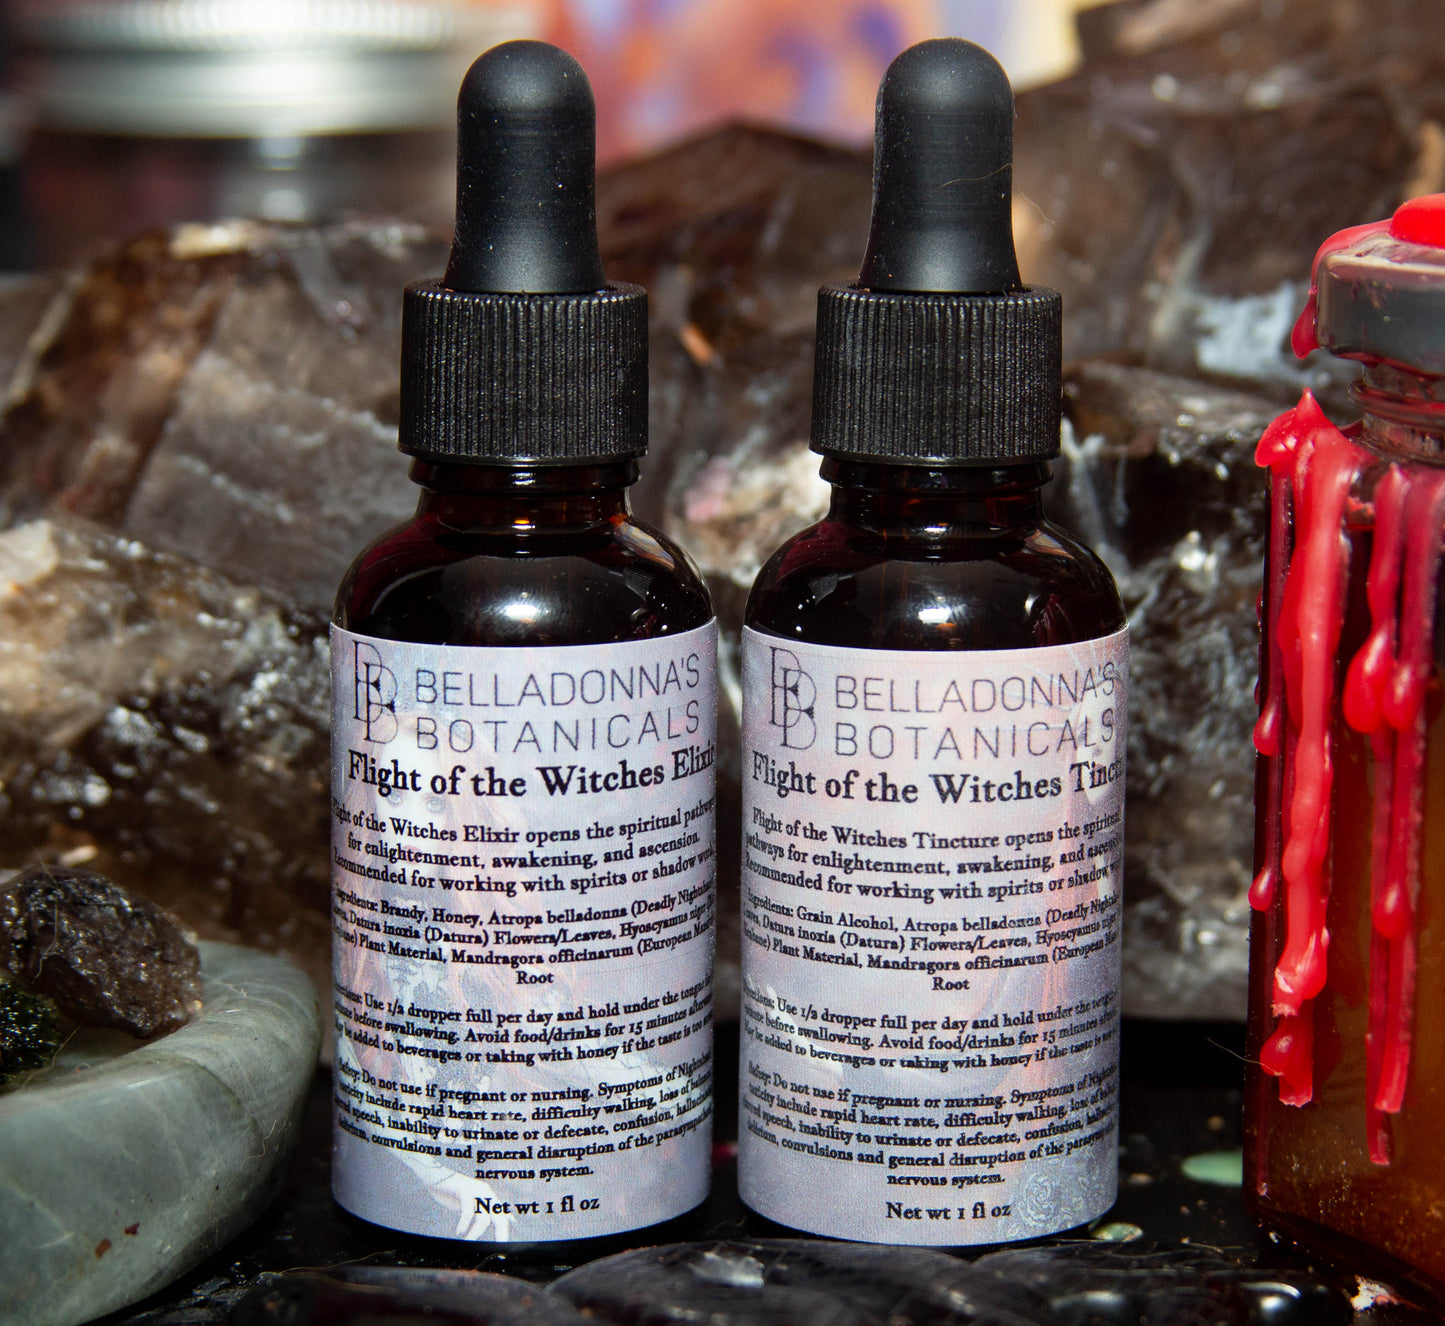 Flight of the Witches Tincture/Elixir